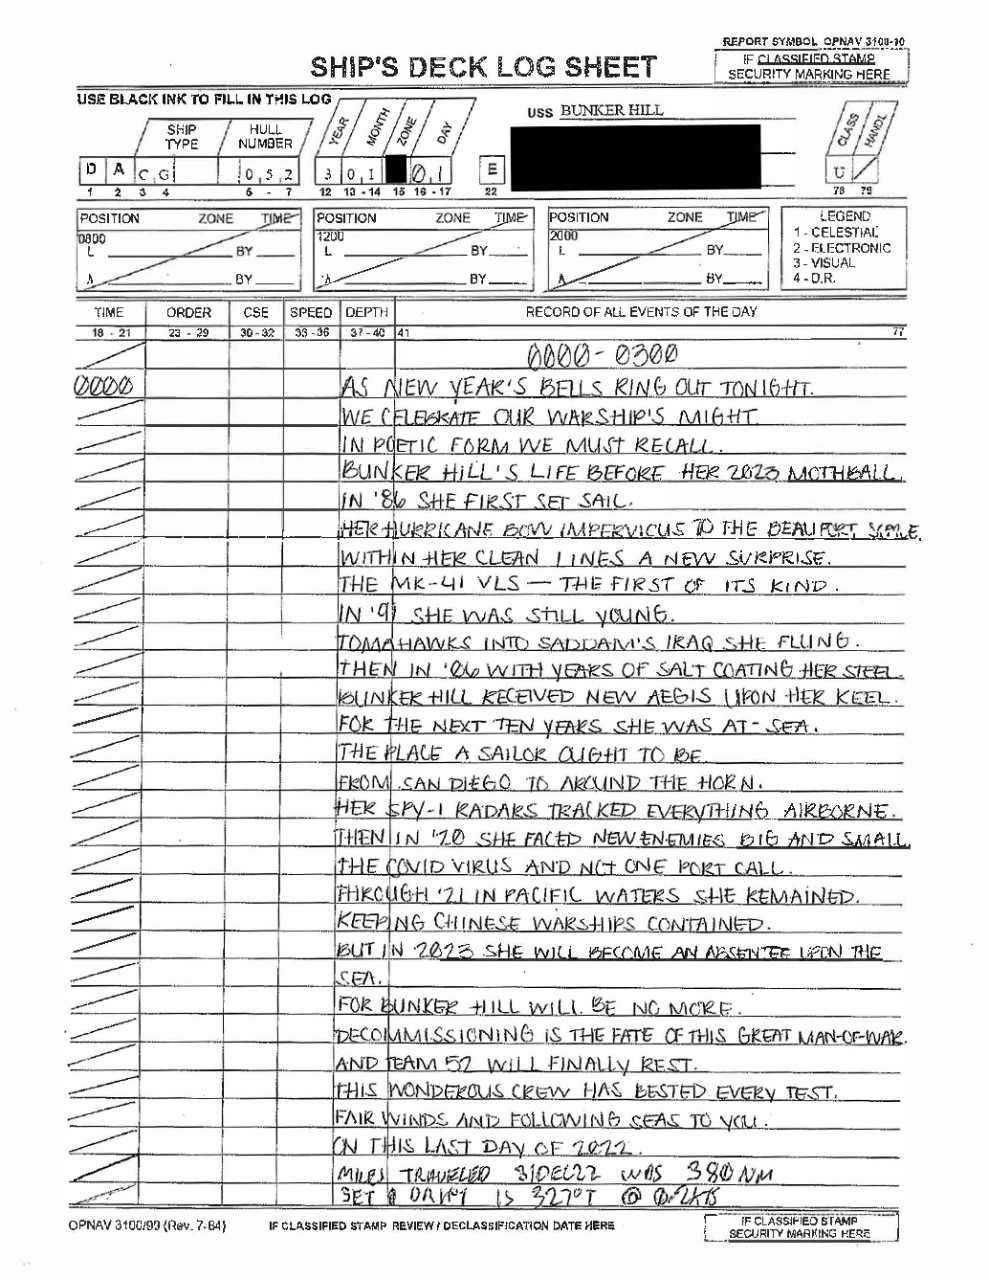 USS BUNKER HILL (CG-52) 2023 New Year's Deck Log Entry Page 1 Image